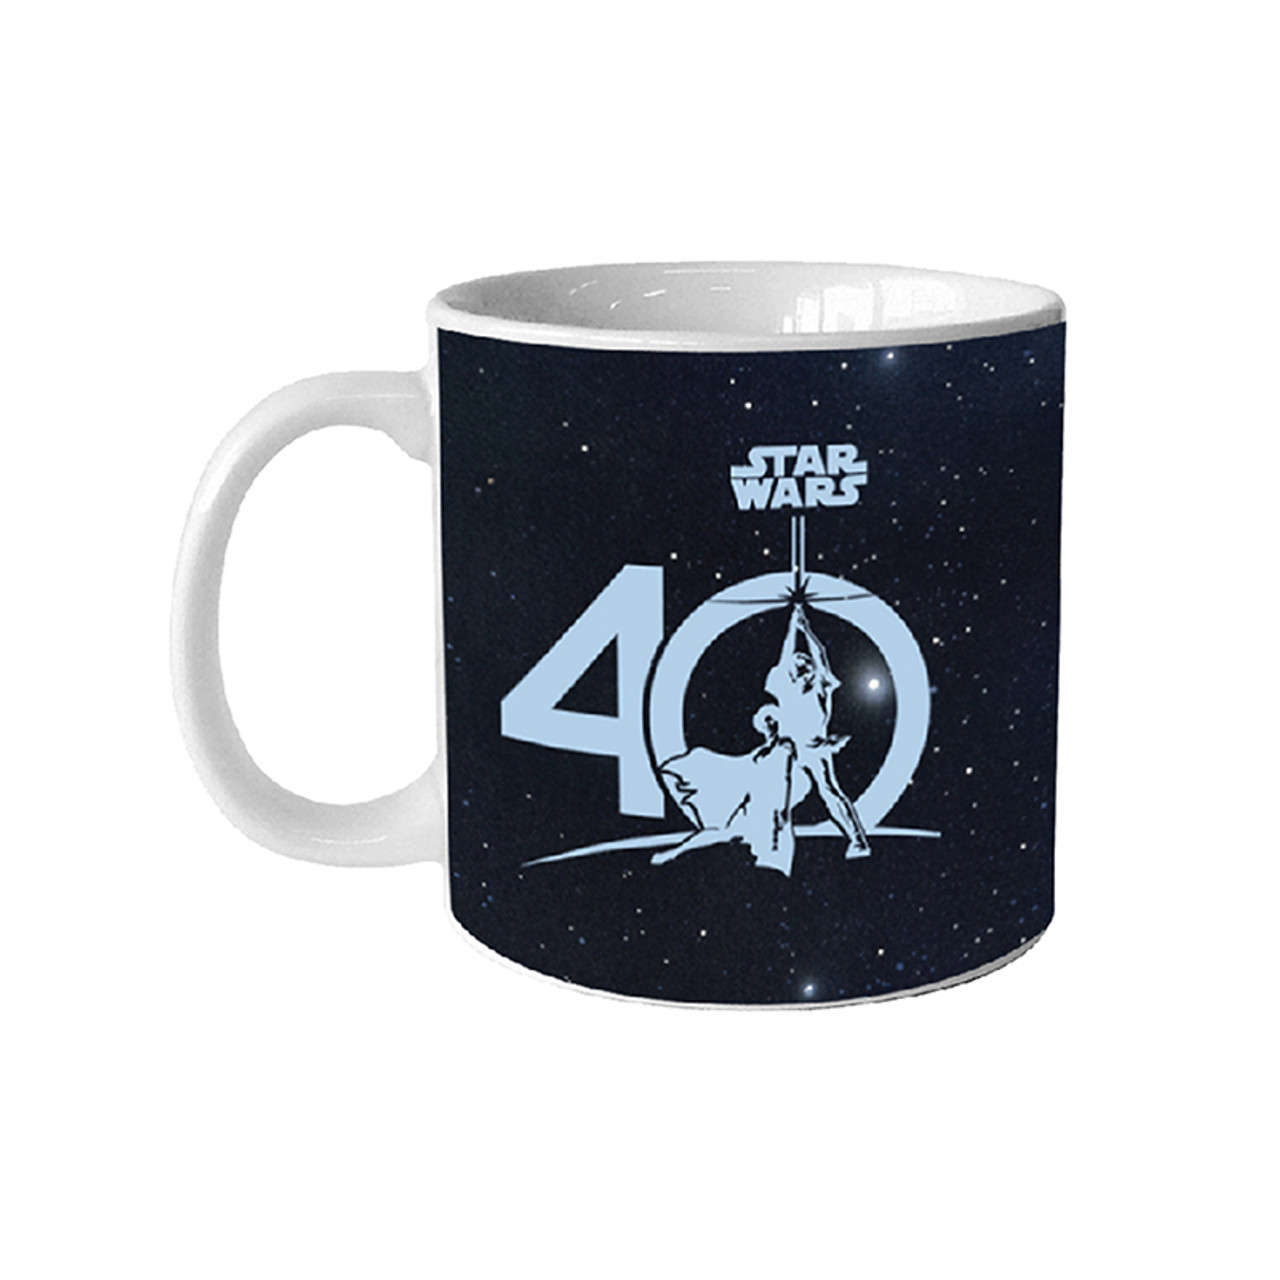 Star Wars Coffee Cup 20 oz Ceramic Mug NEW RARE COLLECTIBLE LIMITED EDITION  2020